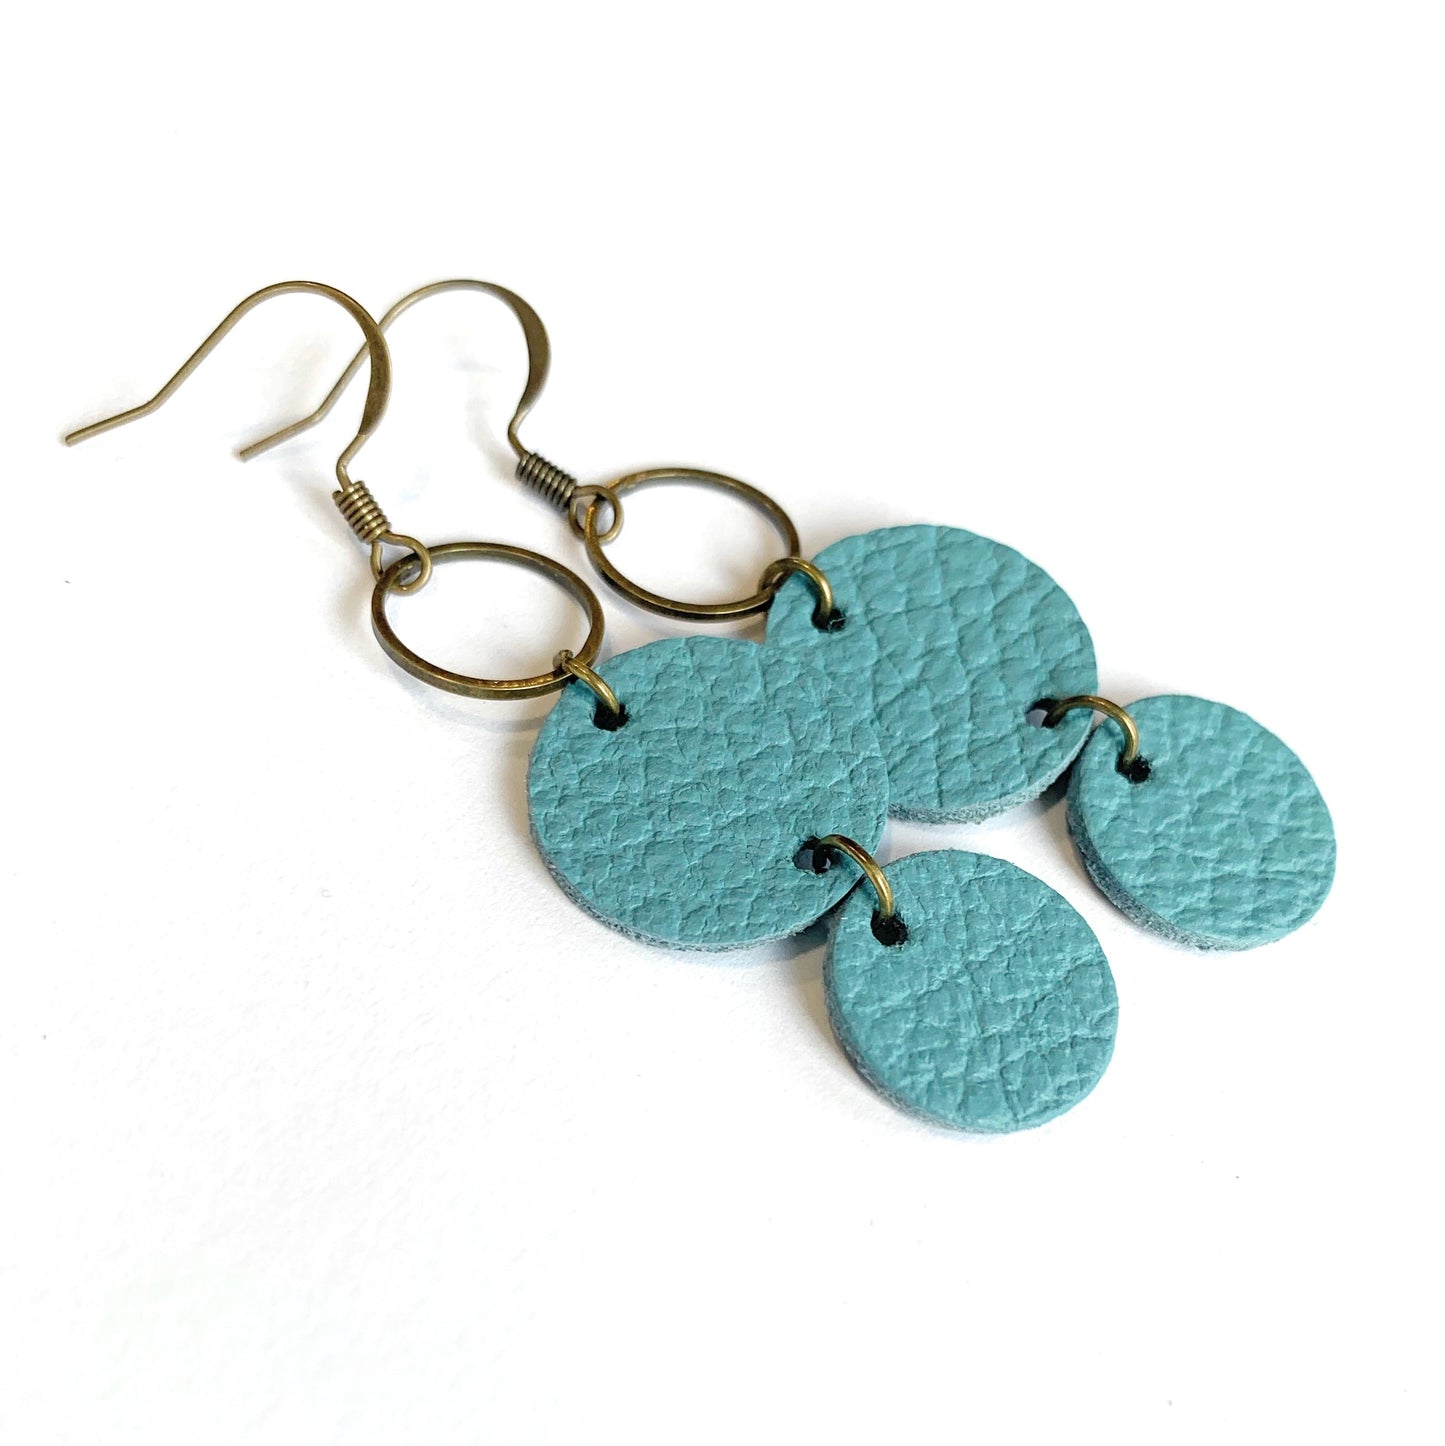 THE DOTTY DANGLE in Vintage Blue